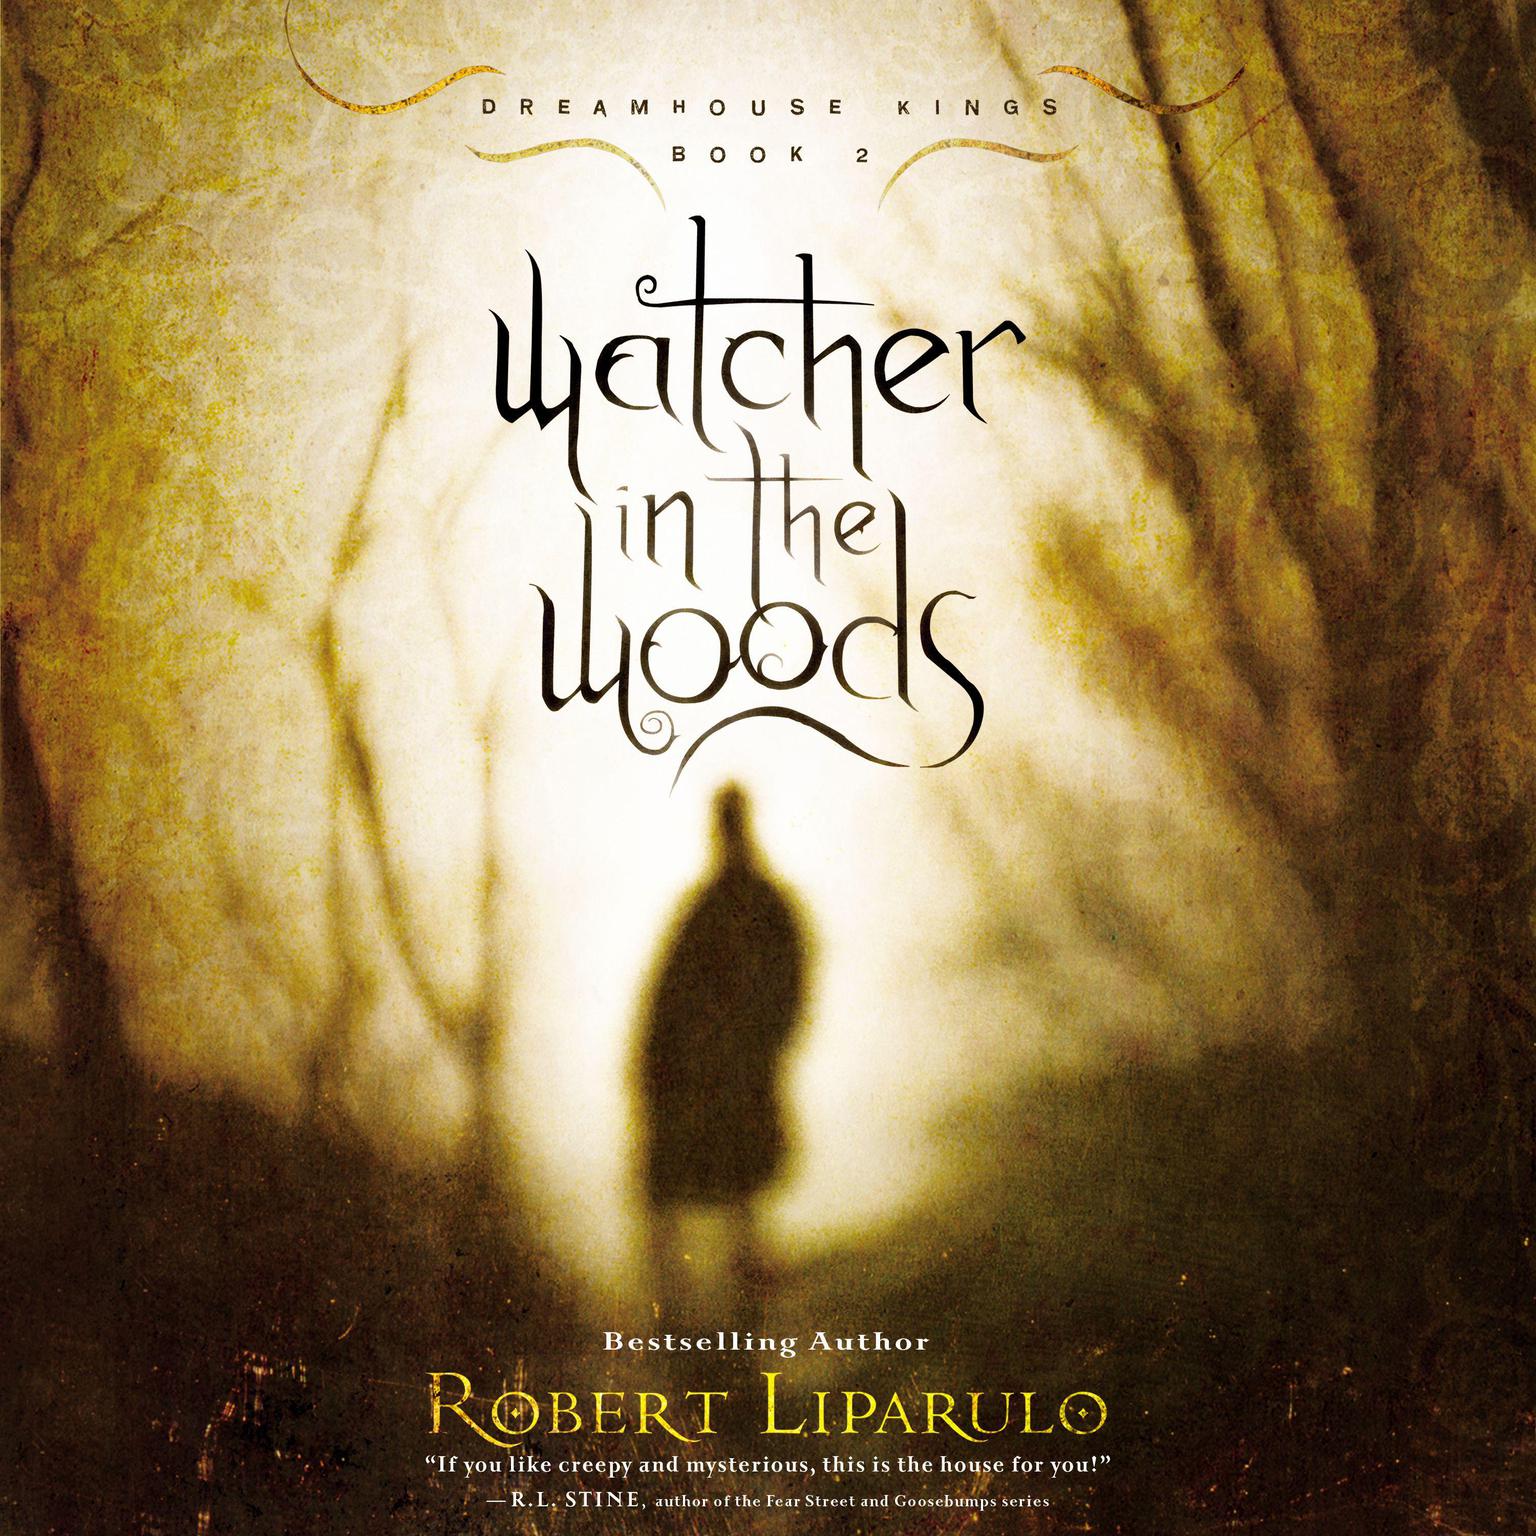 Watcher in the Woods: Dreamhouse Kings, Book #2 Audiobook, by Robert Liparulo